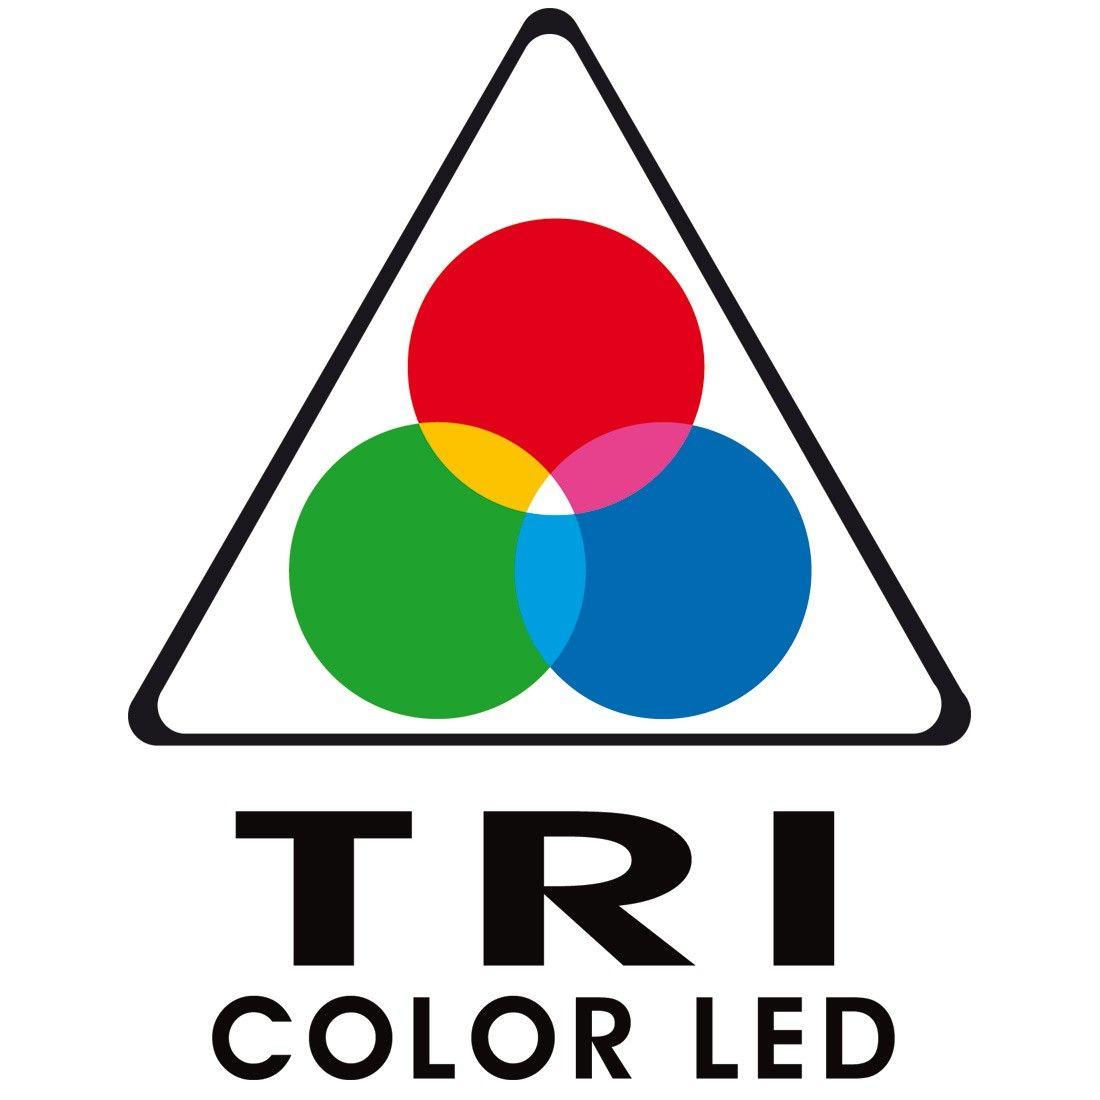 Tri Colored Logo - List of Synonyms and Antonyms of the Word: tricolor logo